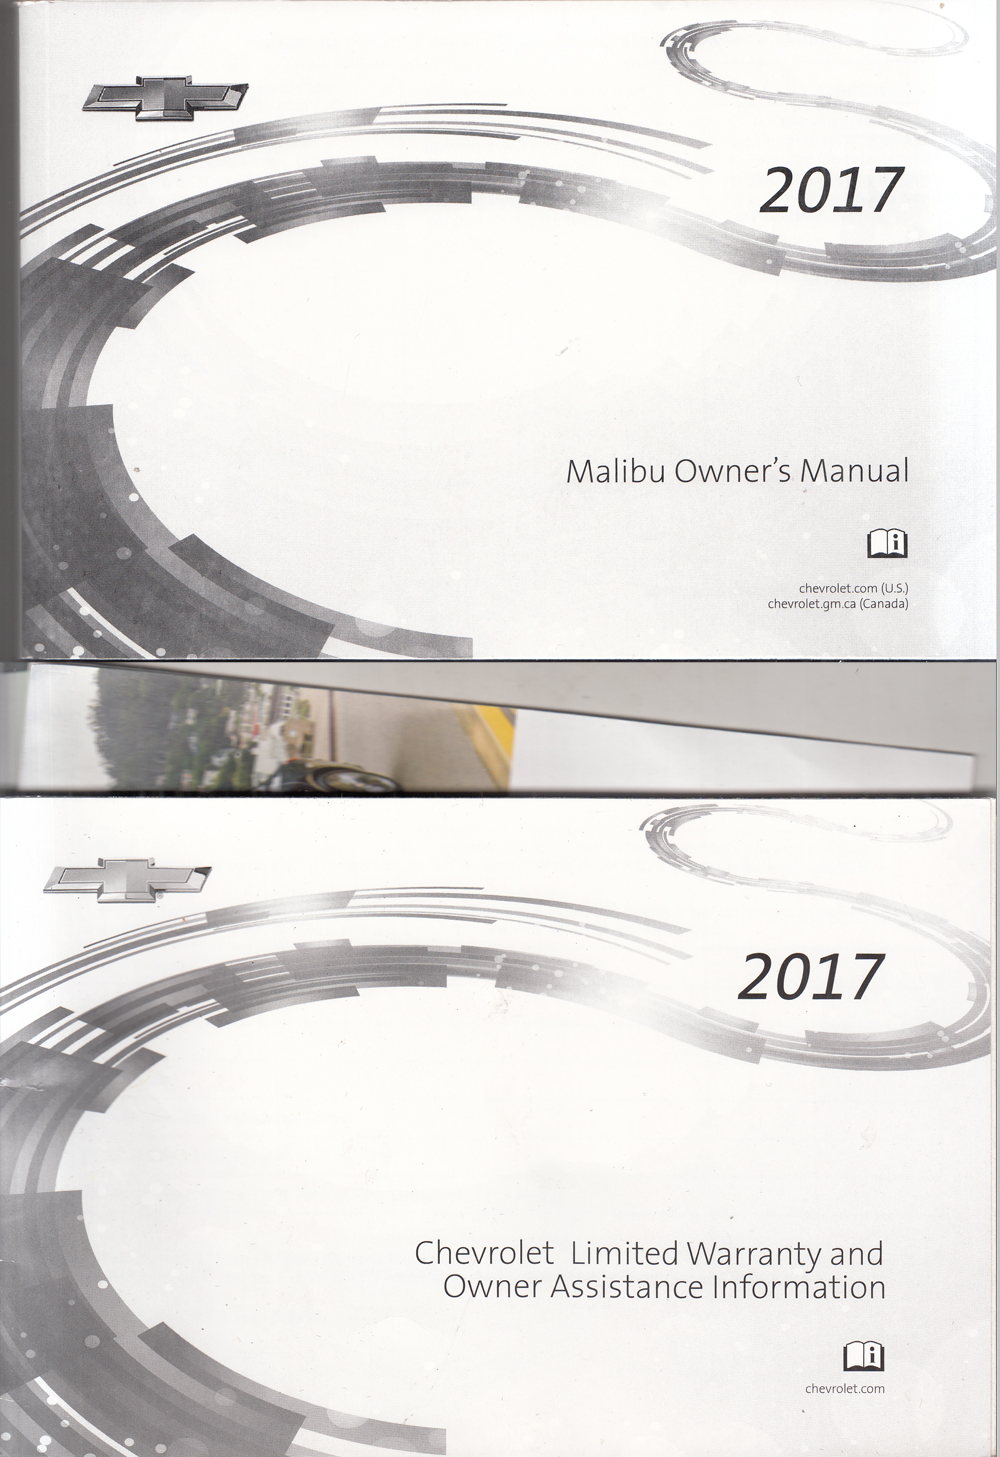 2017 Chevrolet Malibu Owners Manual with Pamphlets Original